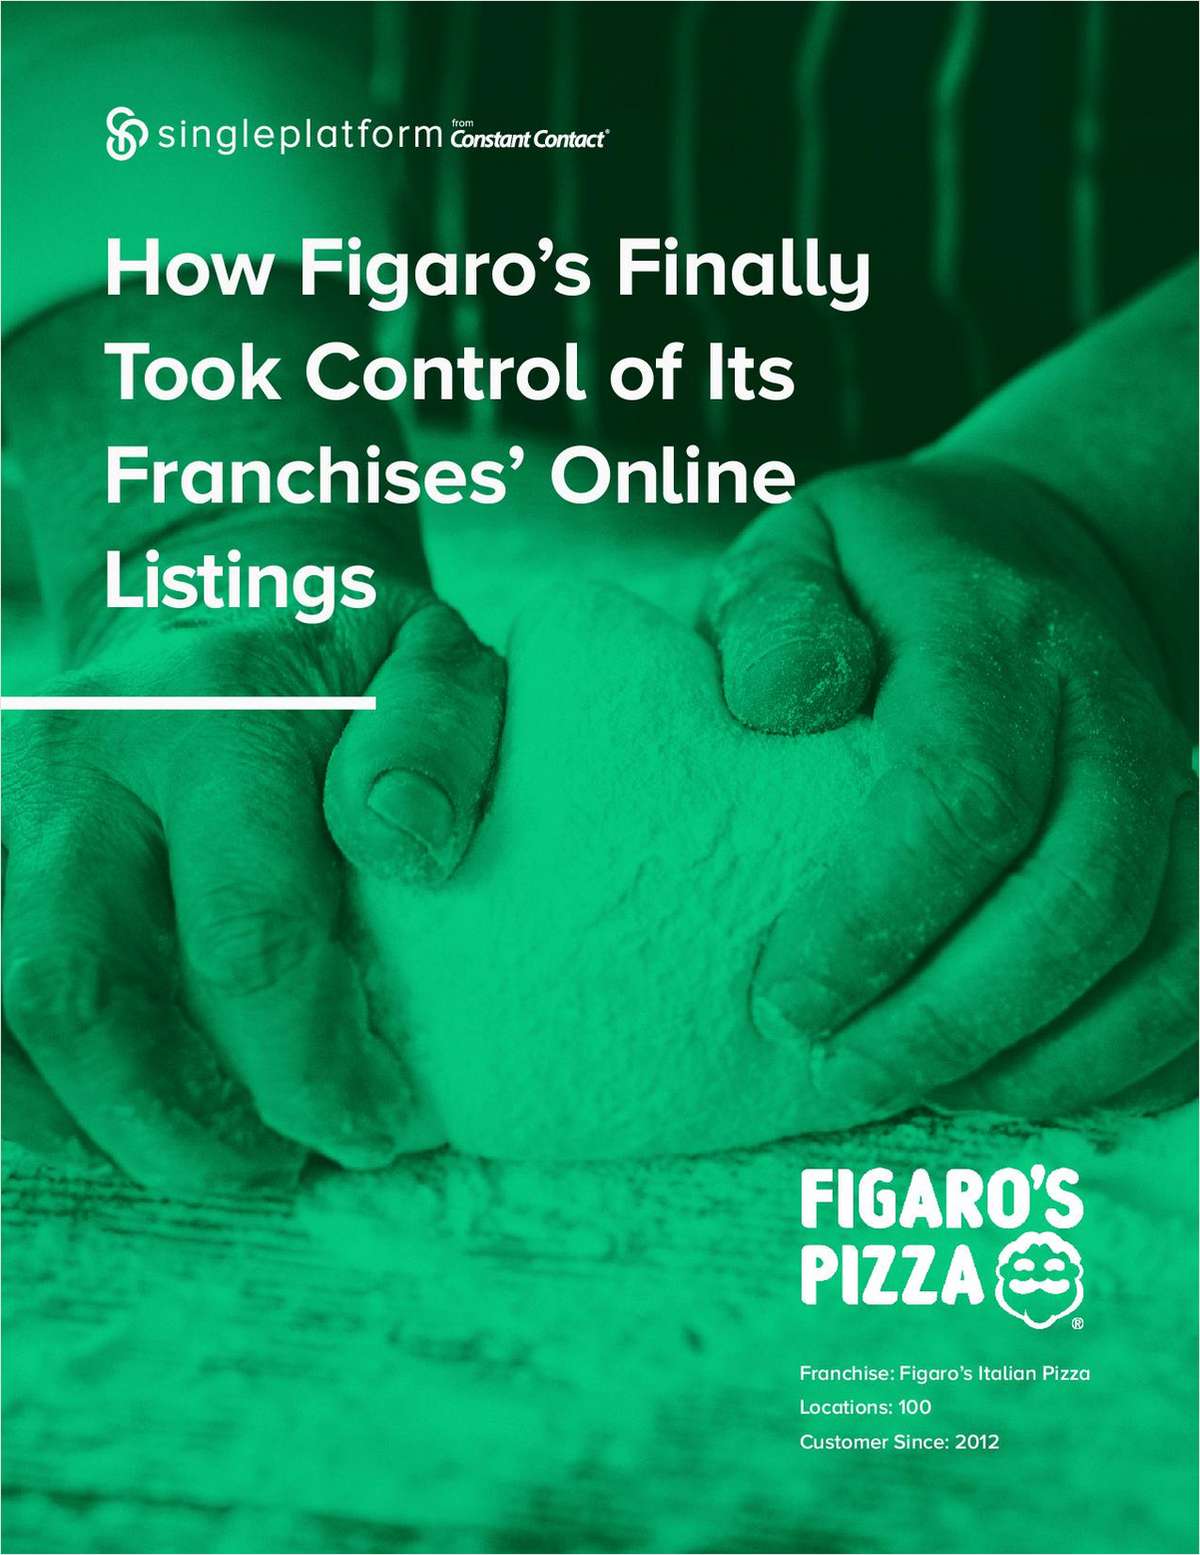 How Figaro's finally took Control of Its Franchises' Online Listings